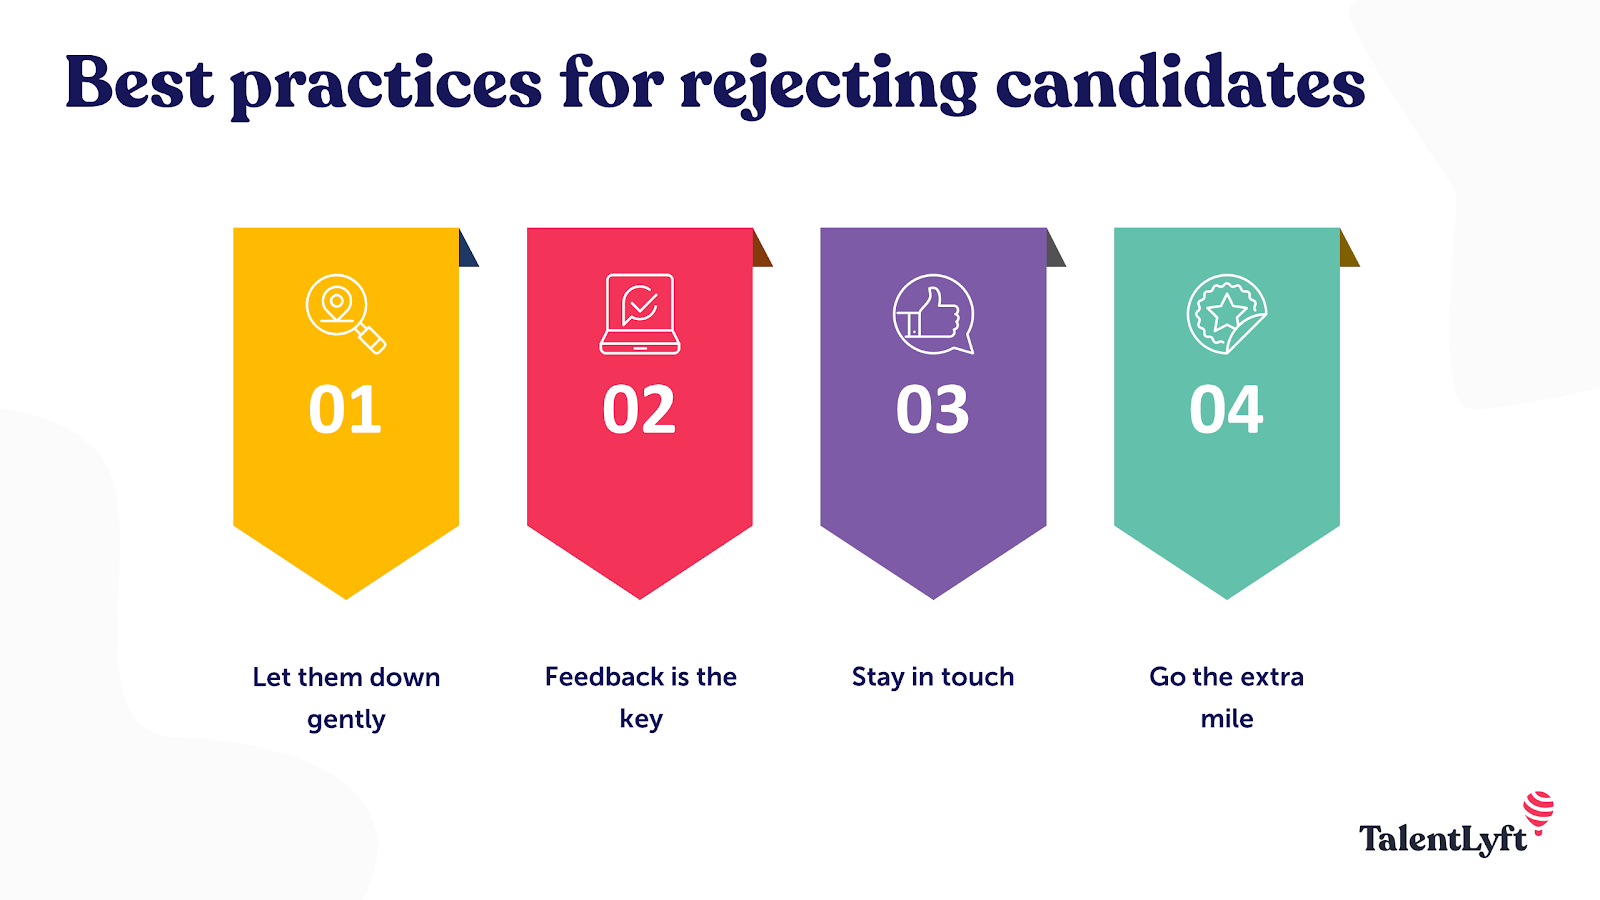 Best ways to reject candidates